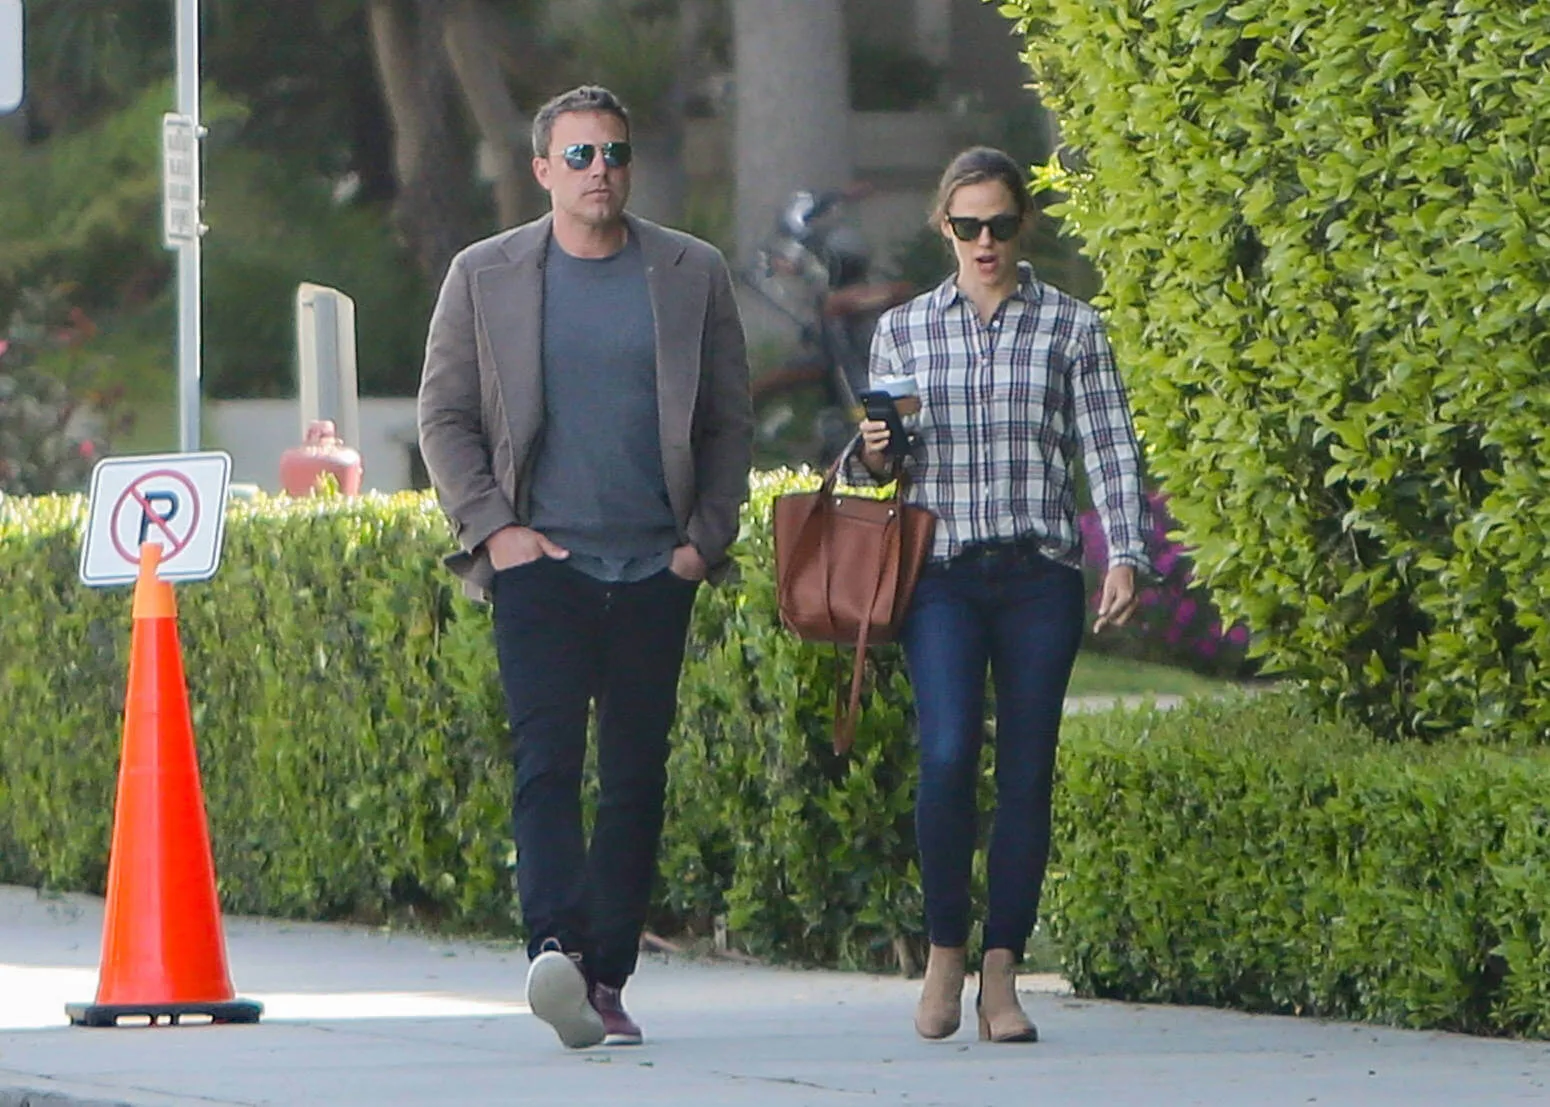 Ben Affleck and Jennifer Garner walking on a side walk in Los Angeles in 2019. They're dressed casually and wearing sunglasses. 